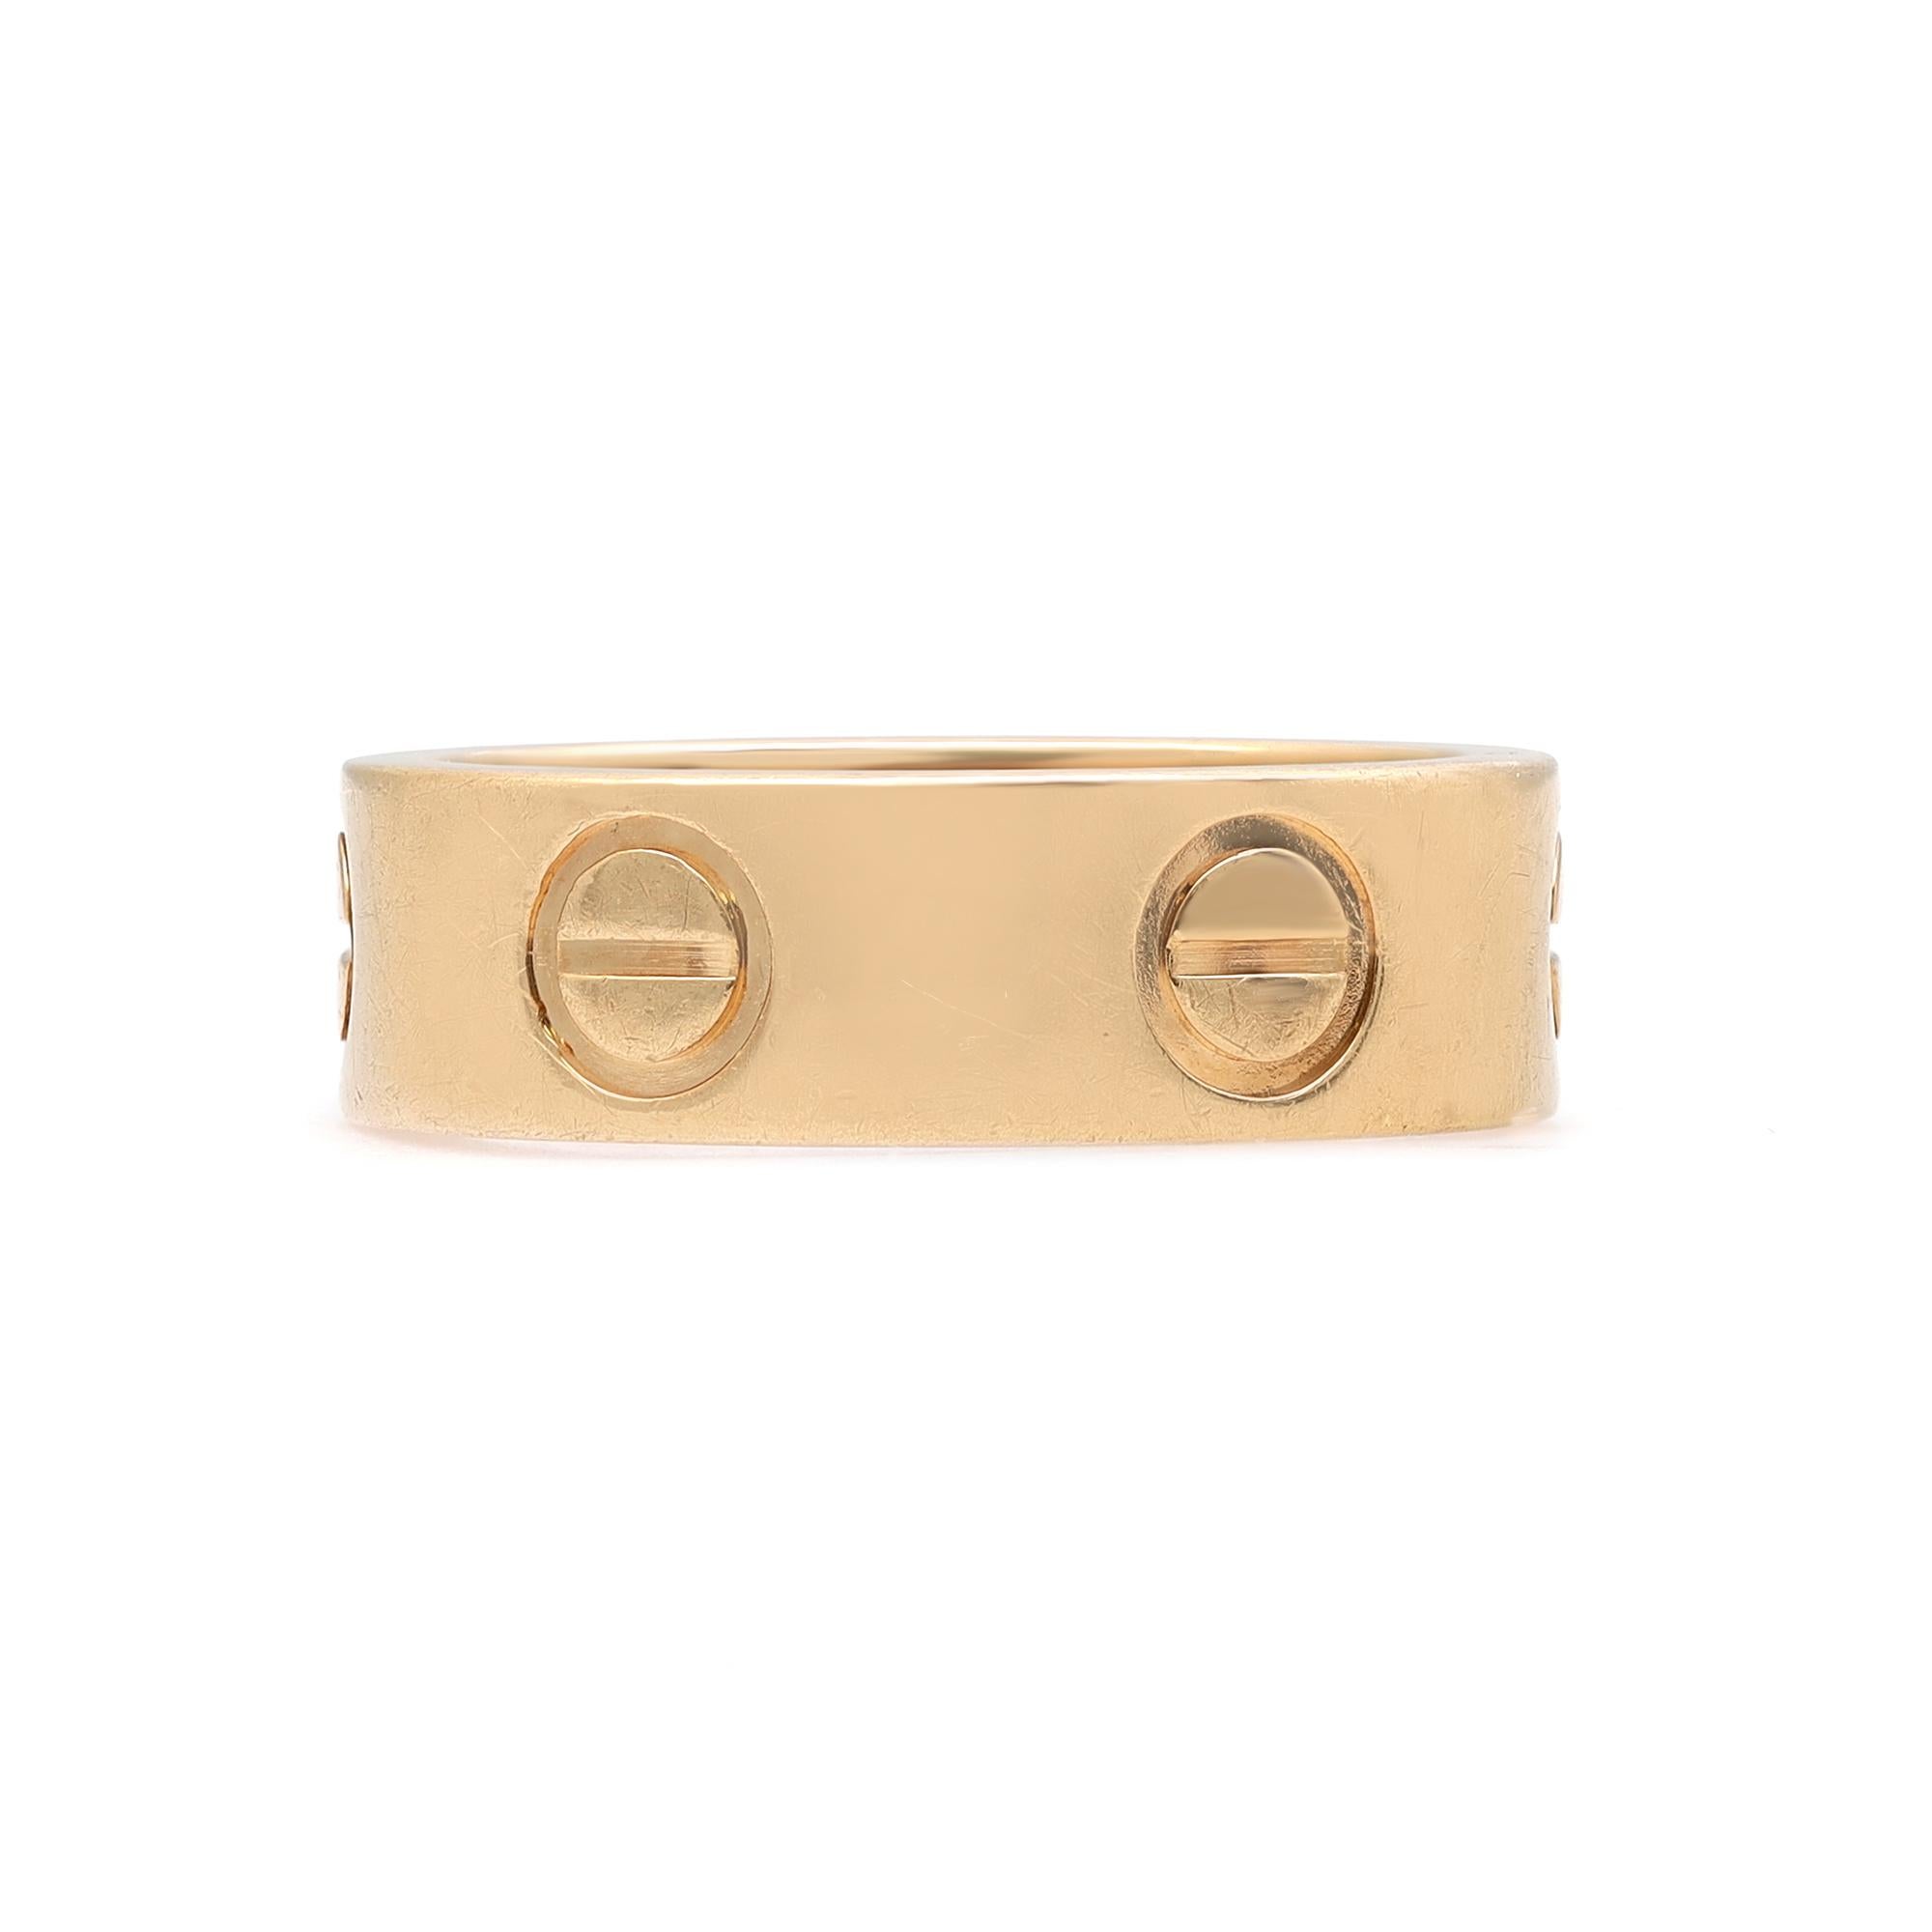 Cartier Love ring crafted in 18k yellow gold. Ring size 47 US 4. Width: 5.4mm. Great pre-owned condition. Comes with an old original box and Chronostore appraisal. No papers included.  
